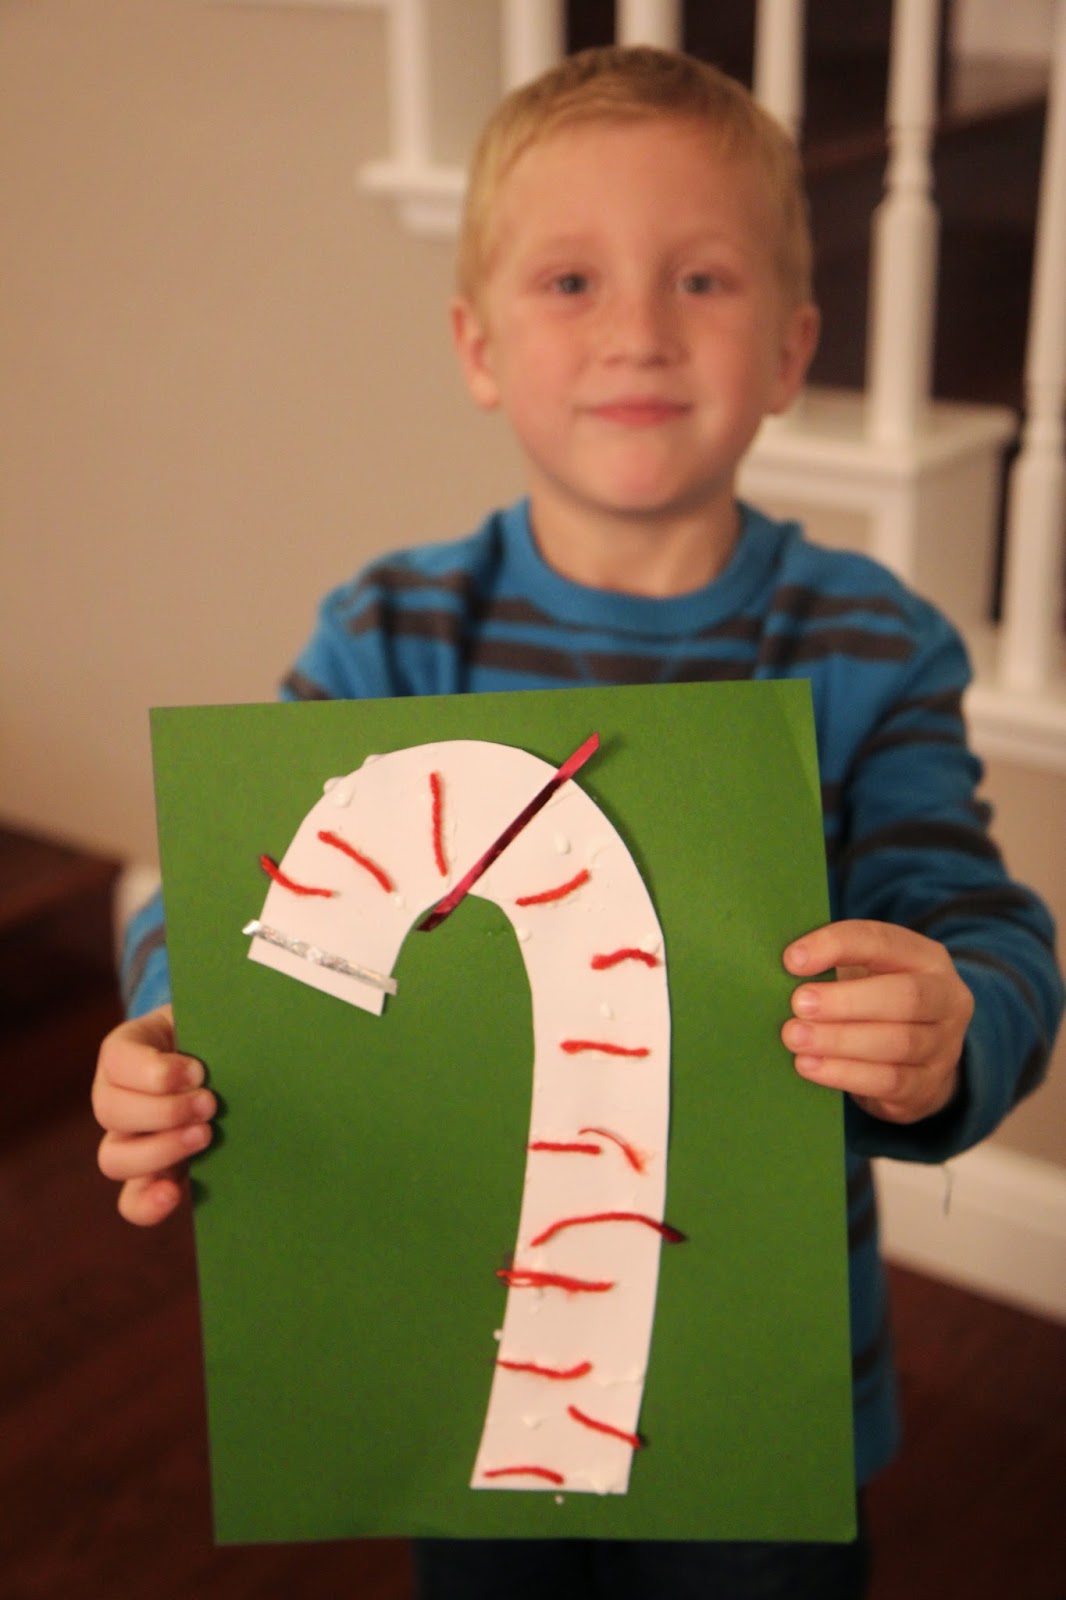 Toddler Approved!: Candy Cane Collage Craft for Toddlers